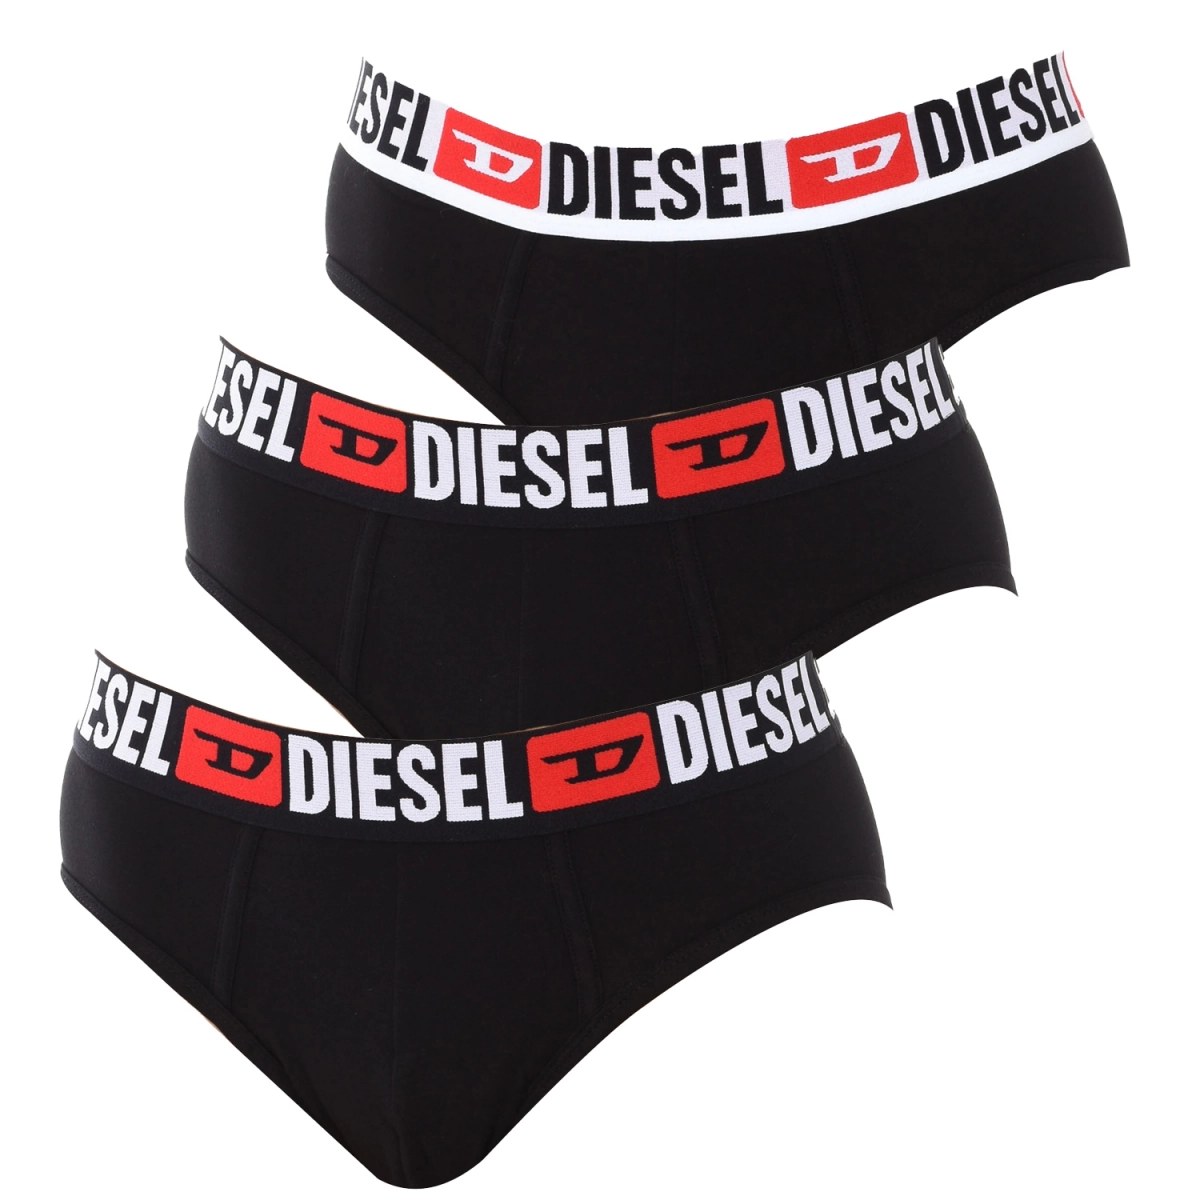 Pack-3 Braguitas Slips Cotton Stretch Diesel 00SH05-0DDAI mujer Talla: XL Color: Negro